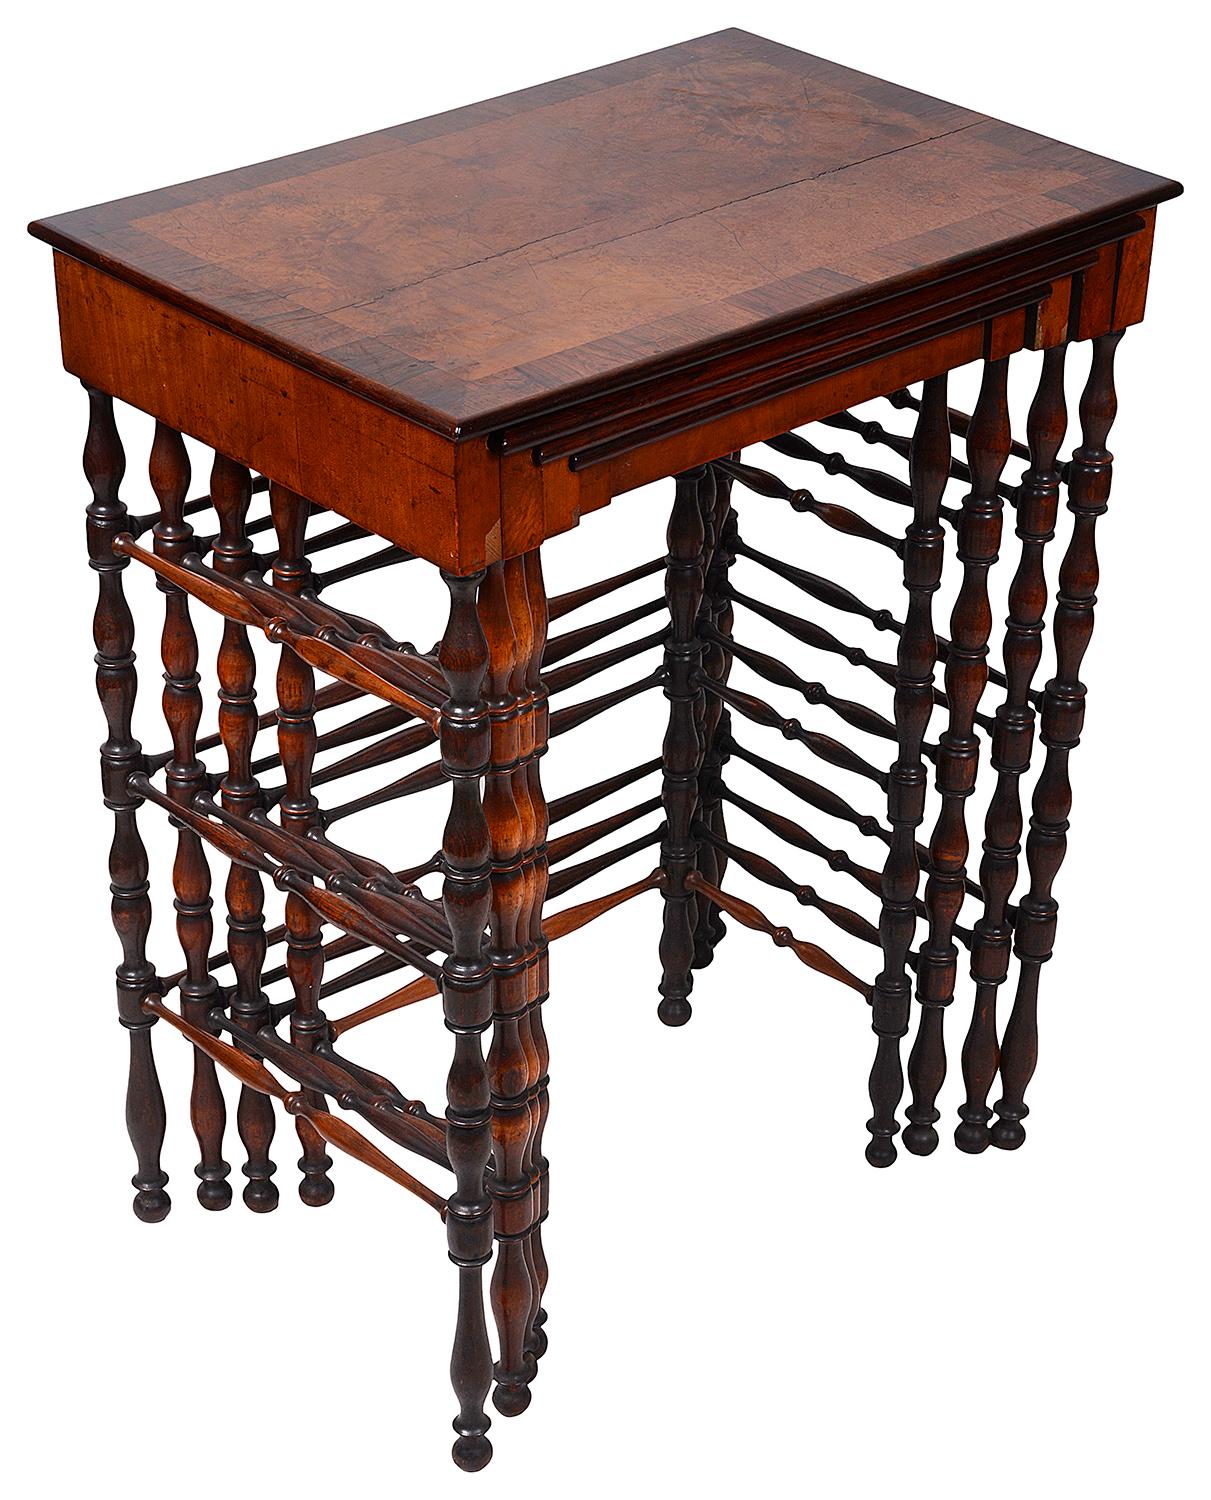 A fine quality nest of four tables in various specimen woods veneered on Mahogany, One table being a games table, raised on ring turned supports and stretchers between.
In the manner of Gillows.